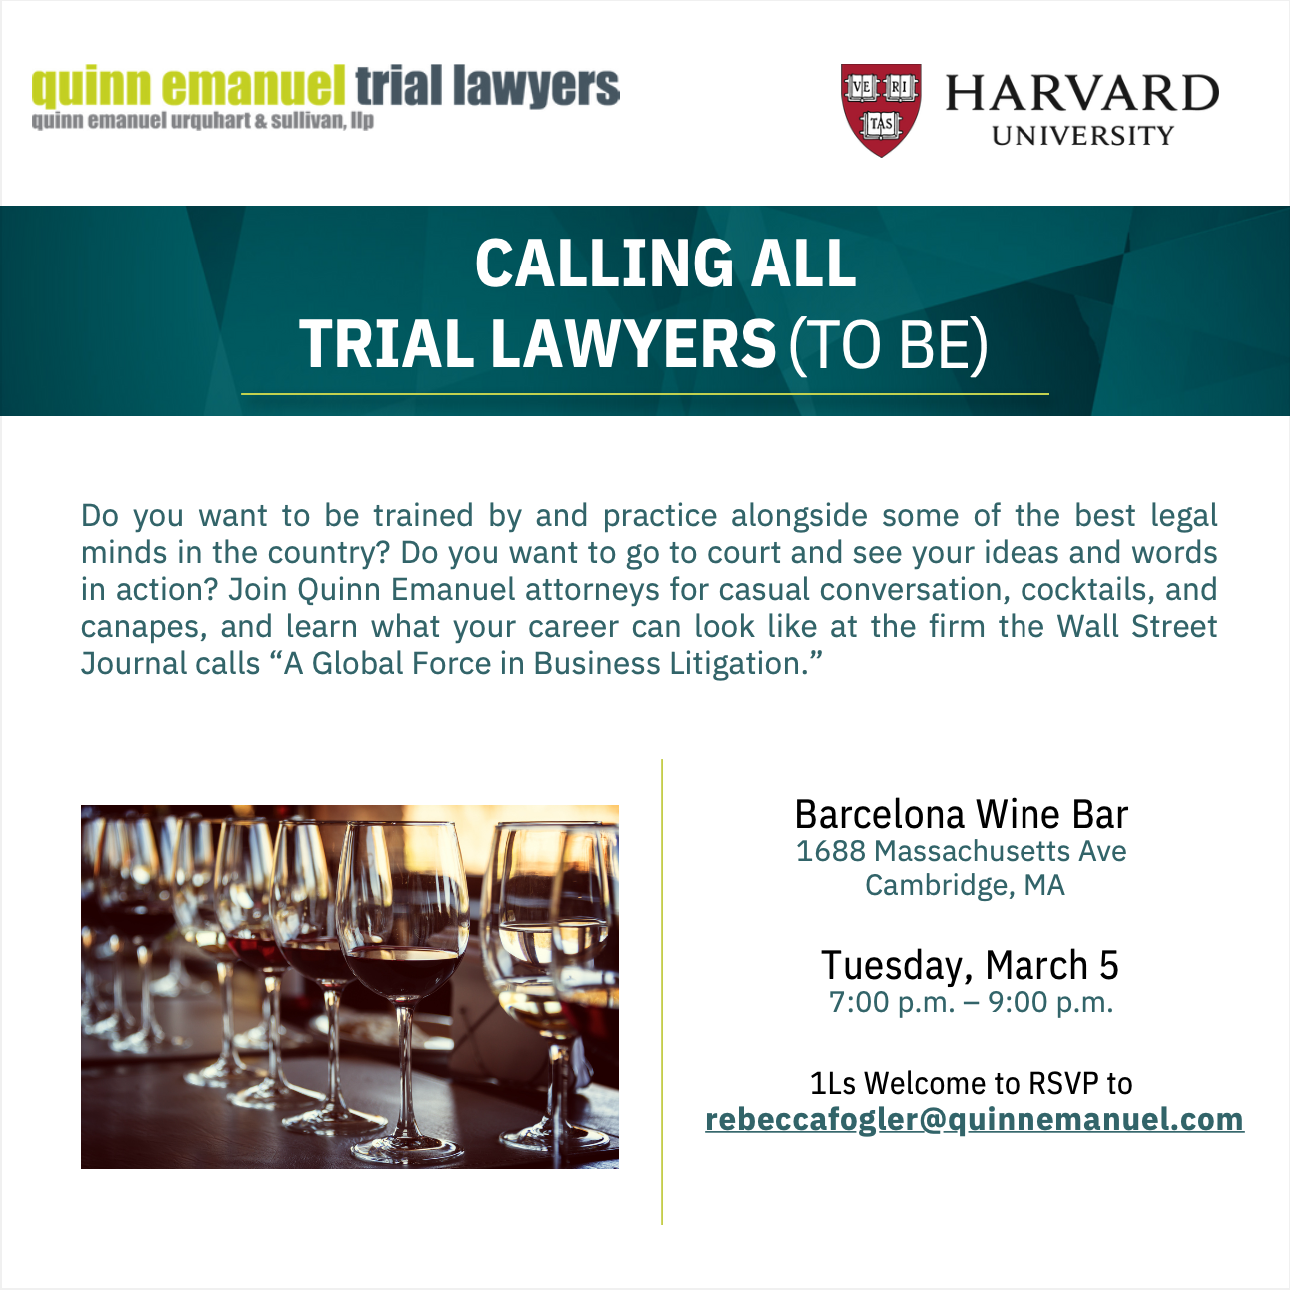 Quinn Emanuel trial lawyers Do you want to be trained by and practice alongside some of the best legal minds in the country? Do you want to go to court and see your ideas and words in action? Join Quinn Emanuel attorneys for casual conversation, cocktails, and canapes, and learn what your career can look like at the firm the Wall Street Journal calls “A Global Force in Business Litigation” Barcelona Wine Bar 1688 Massachusetts Ave Cambridge, MA Tuesday, March 5 7:00 - 9:00 pm 1Ls Welcome to RSVP to rebeccafogler@quinnemanuel.com